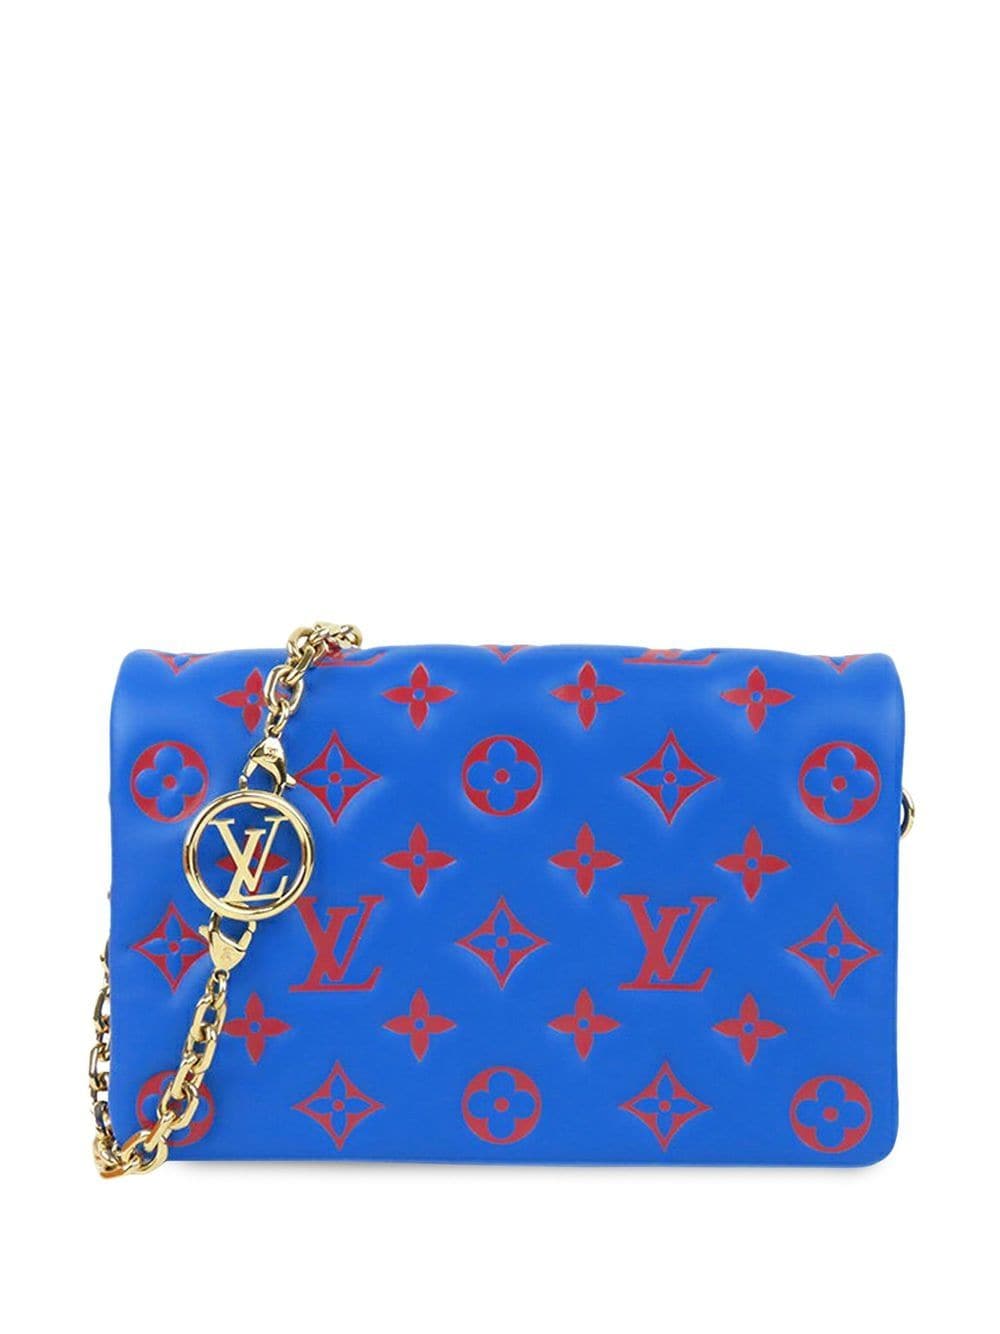 Louis Vuitton Pre-Owned pre-owned monogram Coussin shoulder bag - Blue von Louis Vuitton Pre-Owned